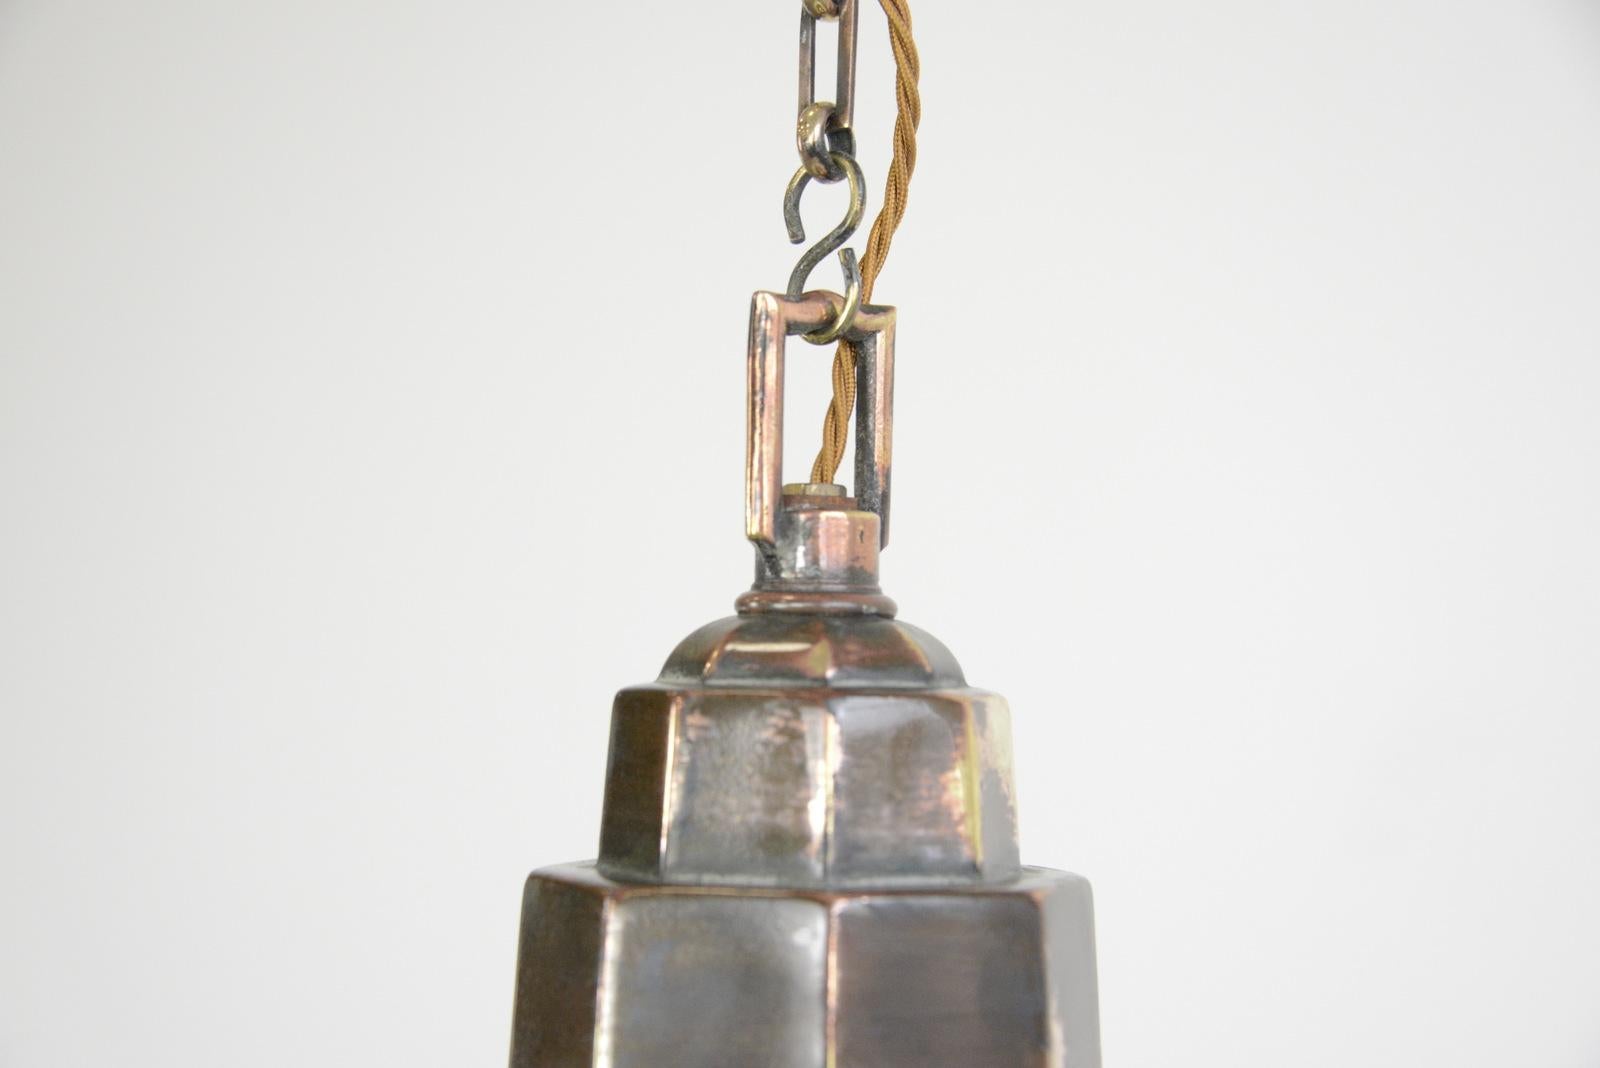 Large Art Deco Opaline pendant light, circa 1920s

- Original stepped copper gallery and chain
- Takes E27 fitting bulbs
- English, 1920s
- Measures: 50cm tall x 30cm wide

Condition report

Fully re wired with modern electrical components,